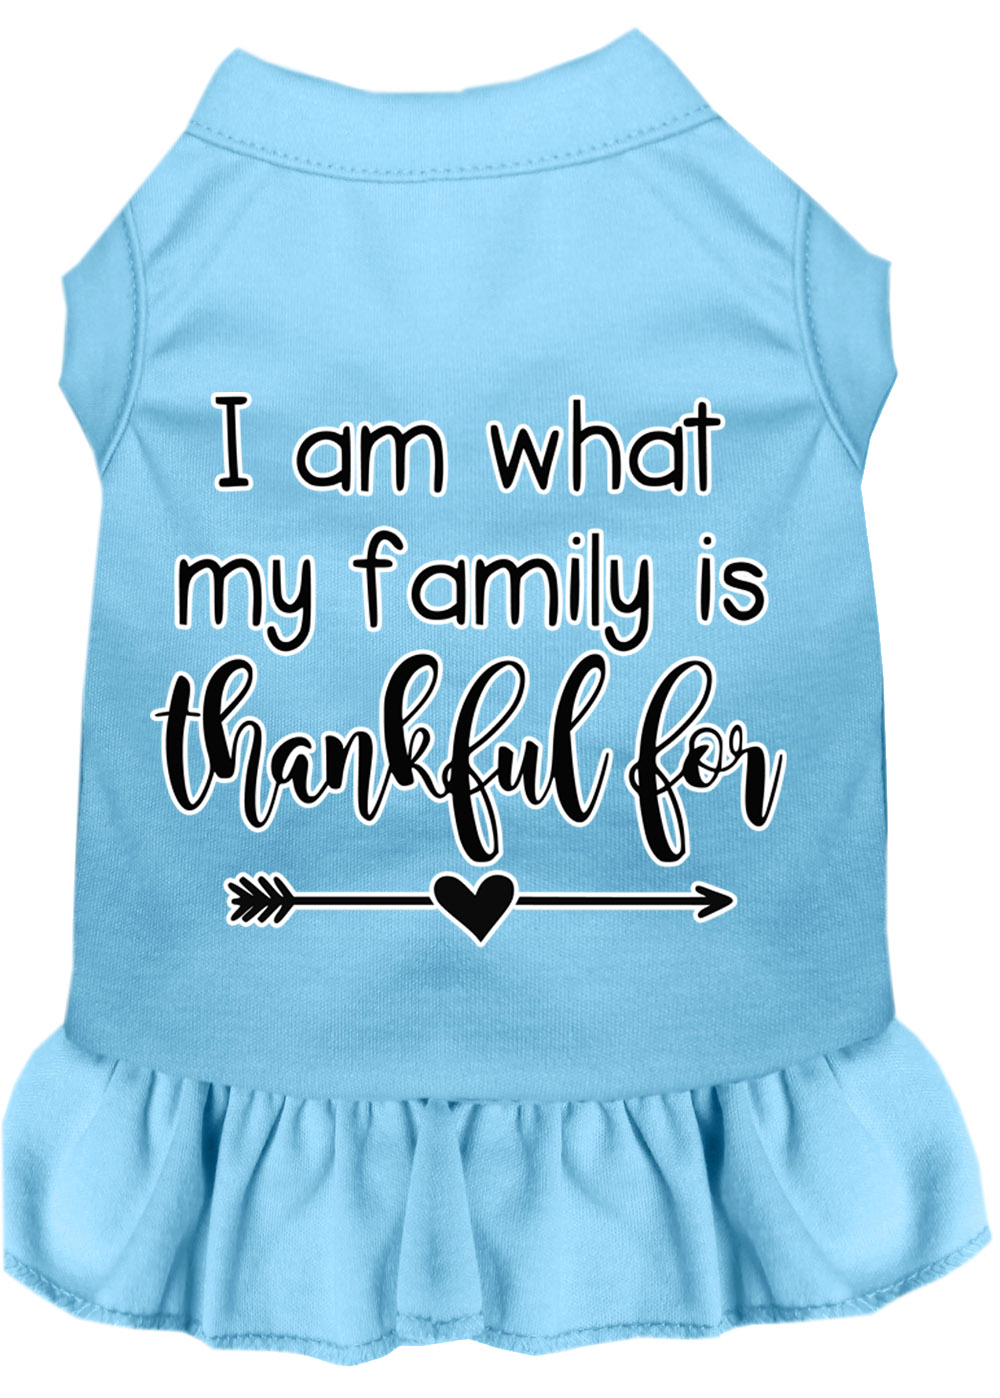 I Am What My Family is Thankful For Screen Print Dog Dress Baby Blue 4X